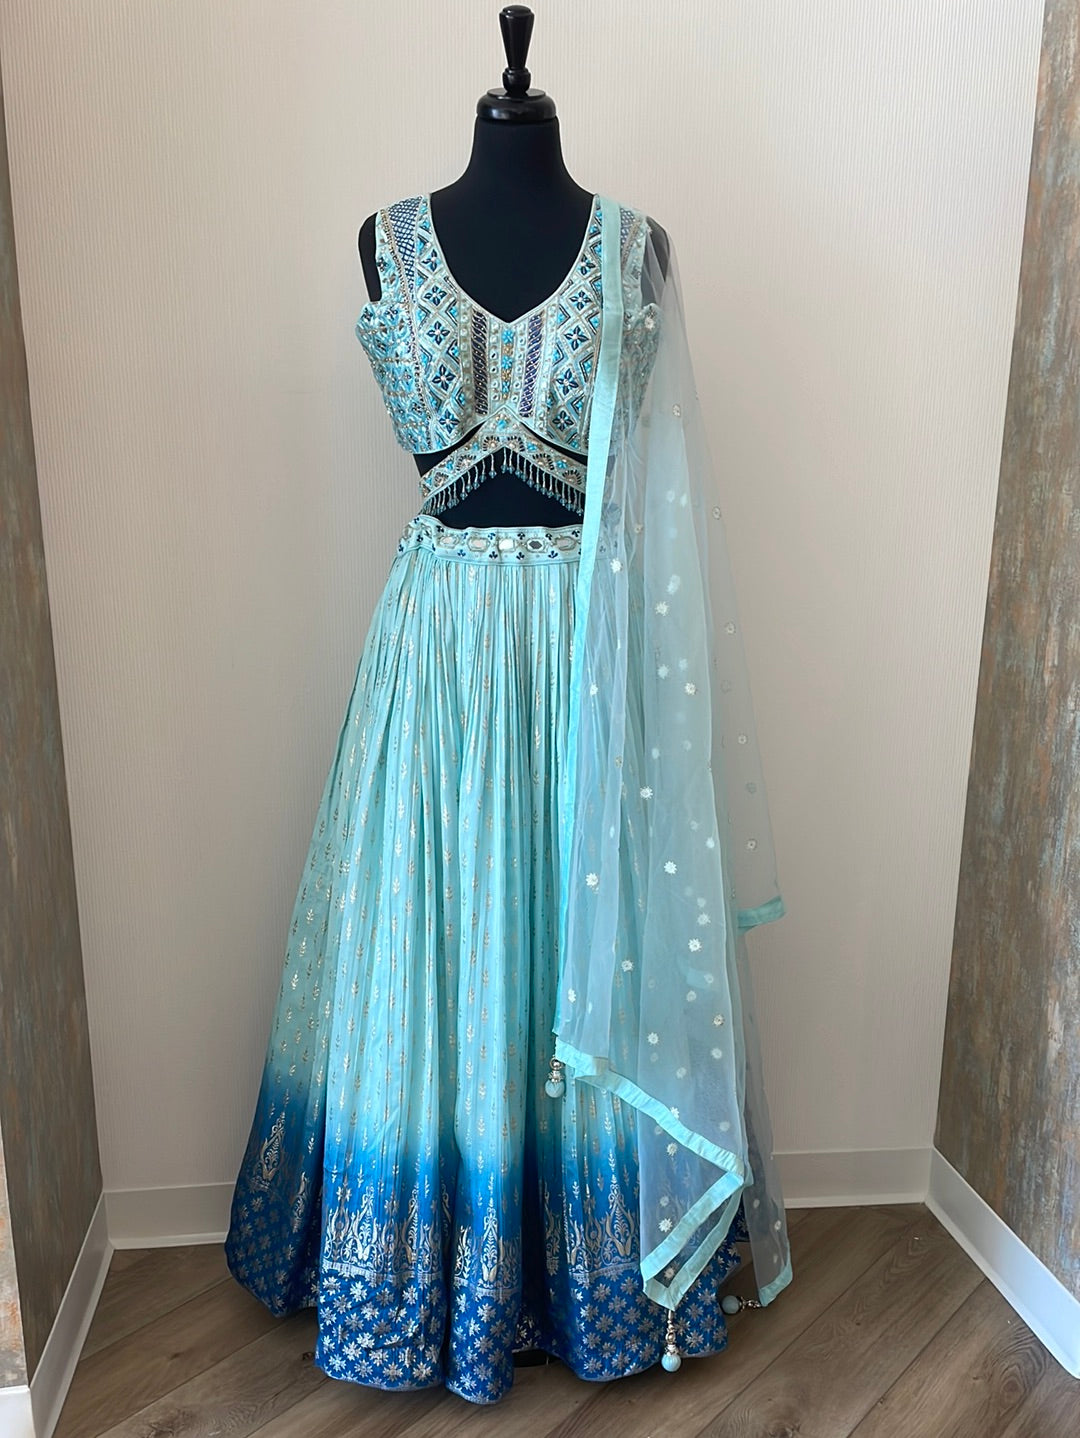 Ombre lehenga with belt attached to embellished choli